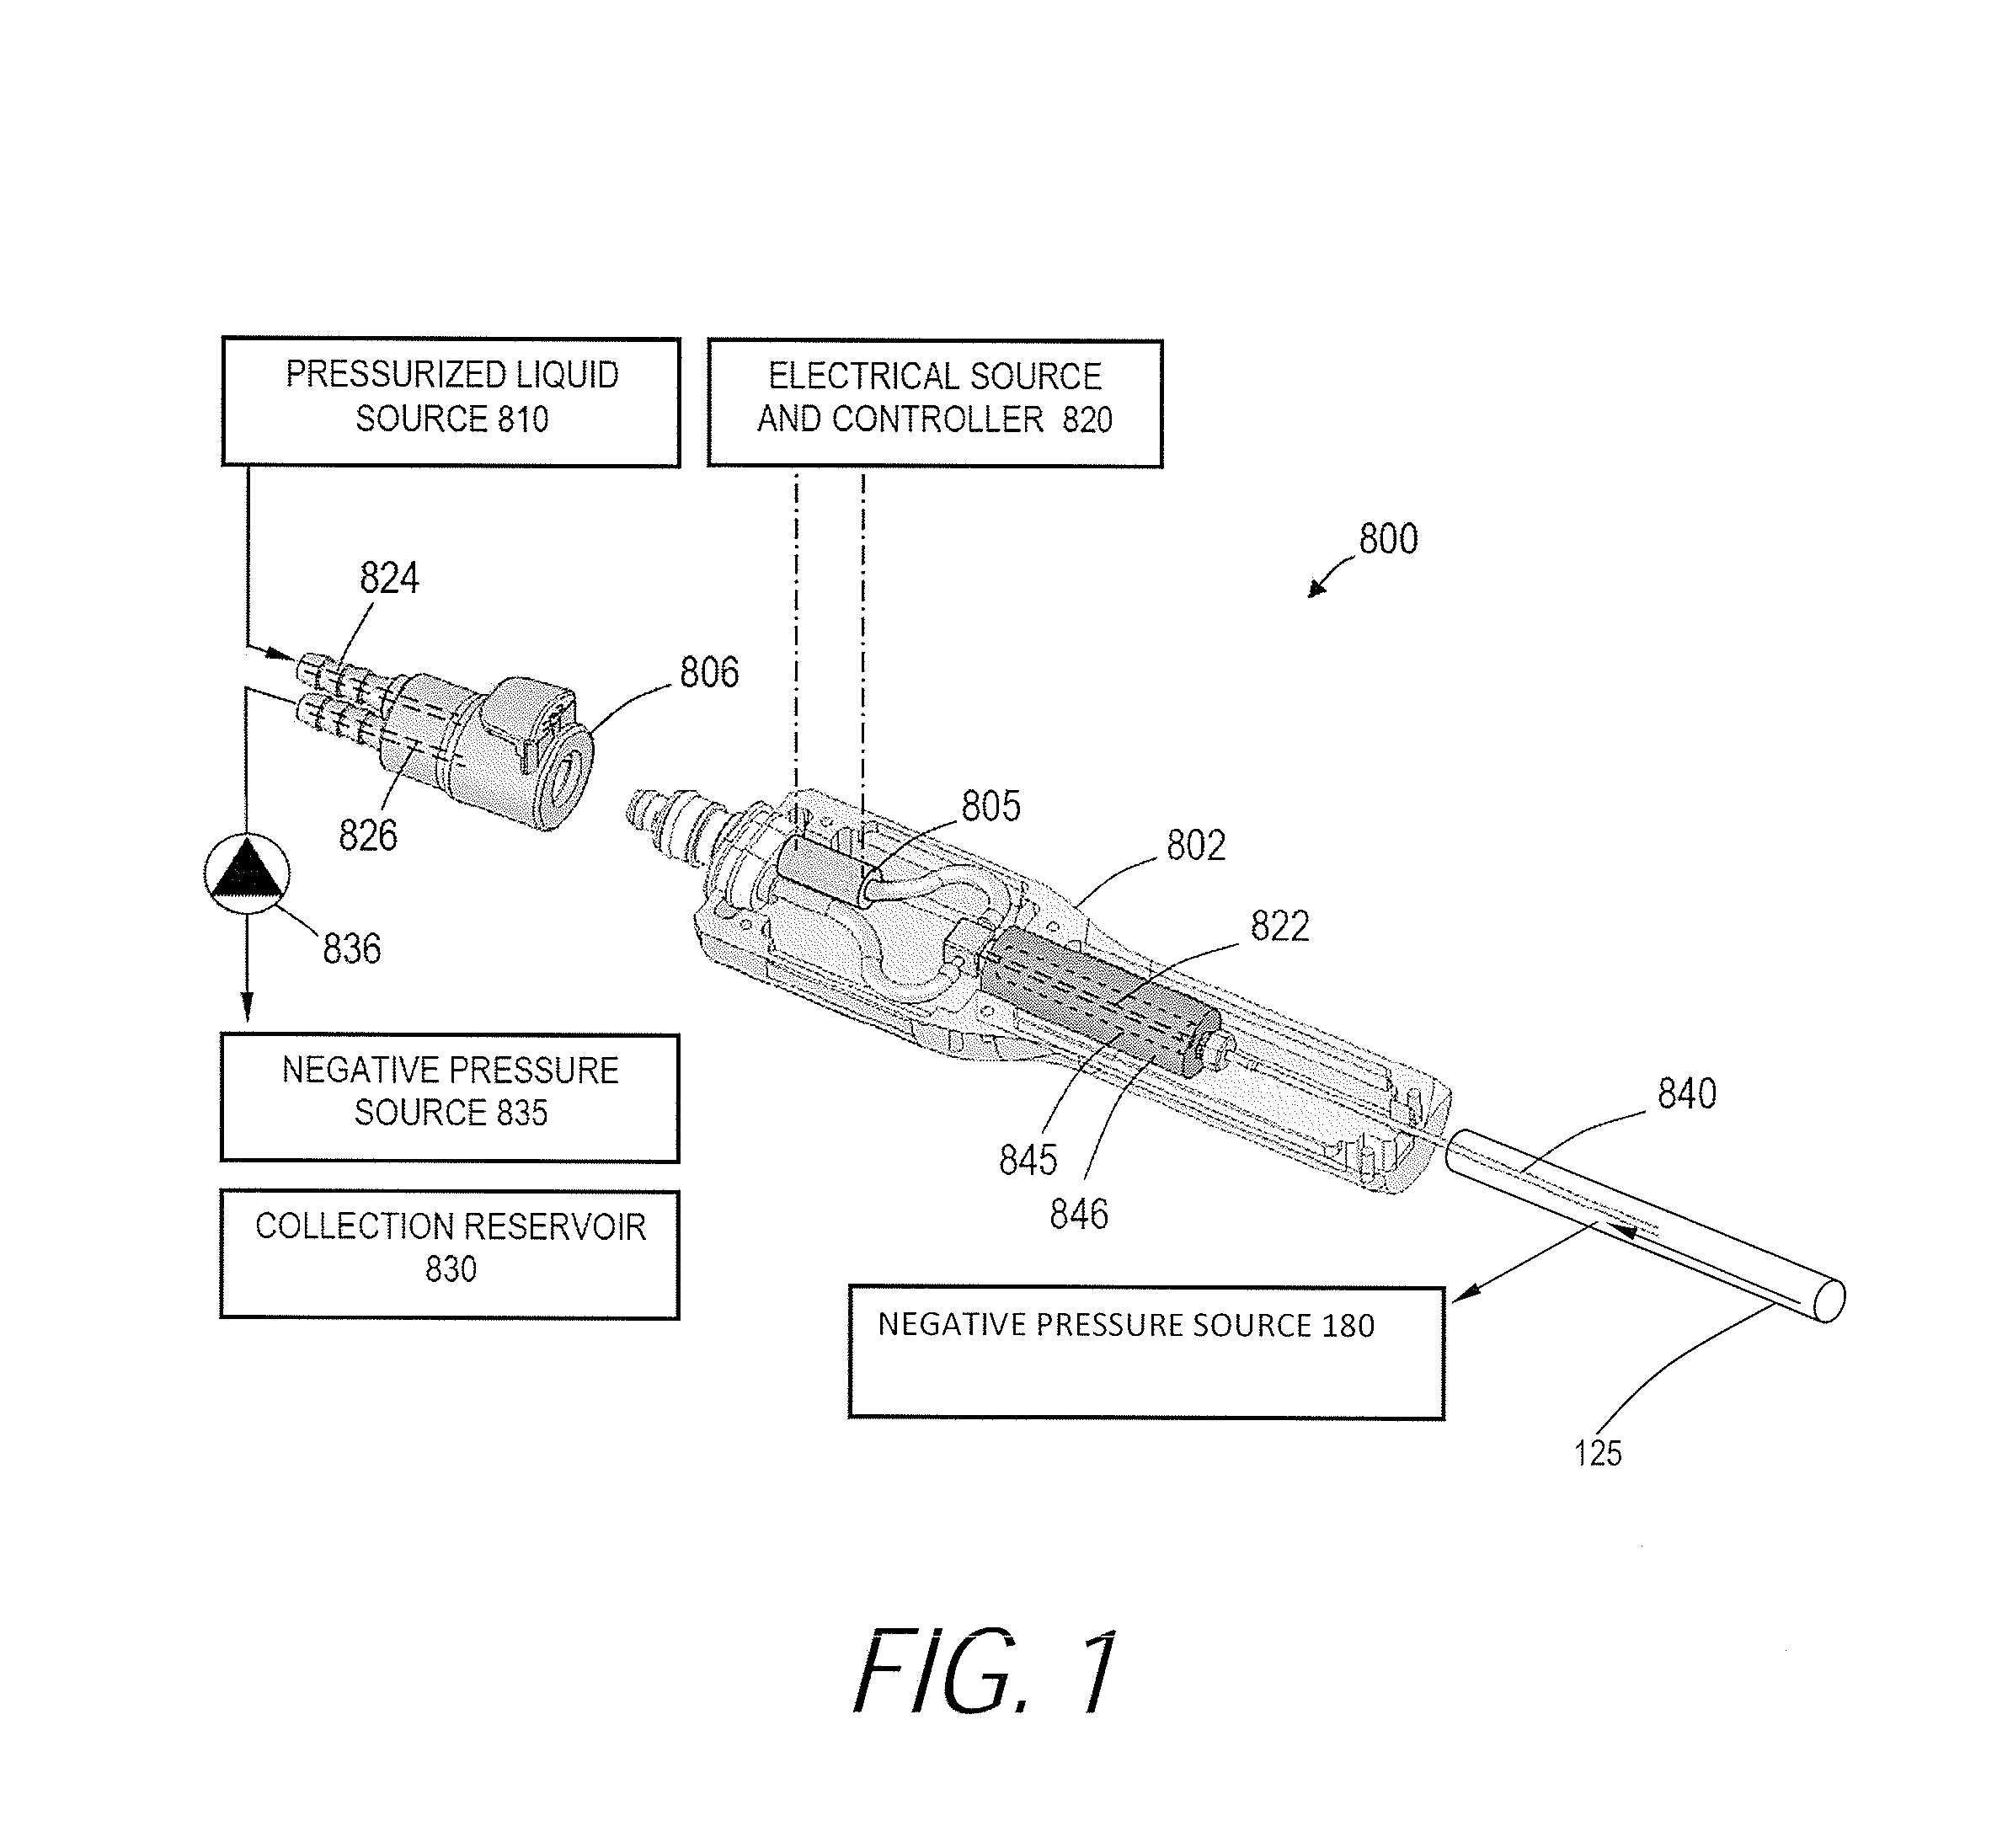 Systems and methods for treatment of prostatic tissue